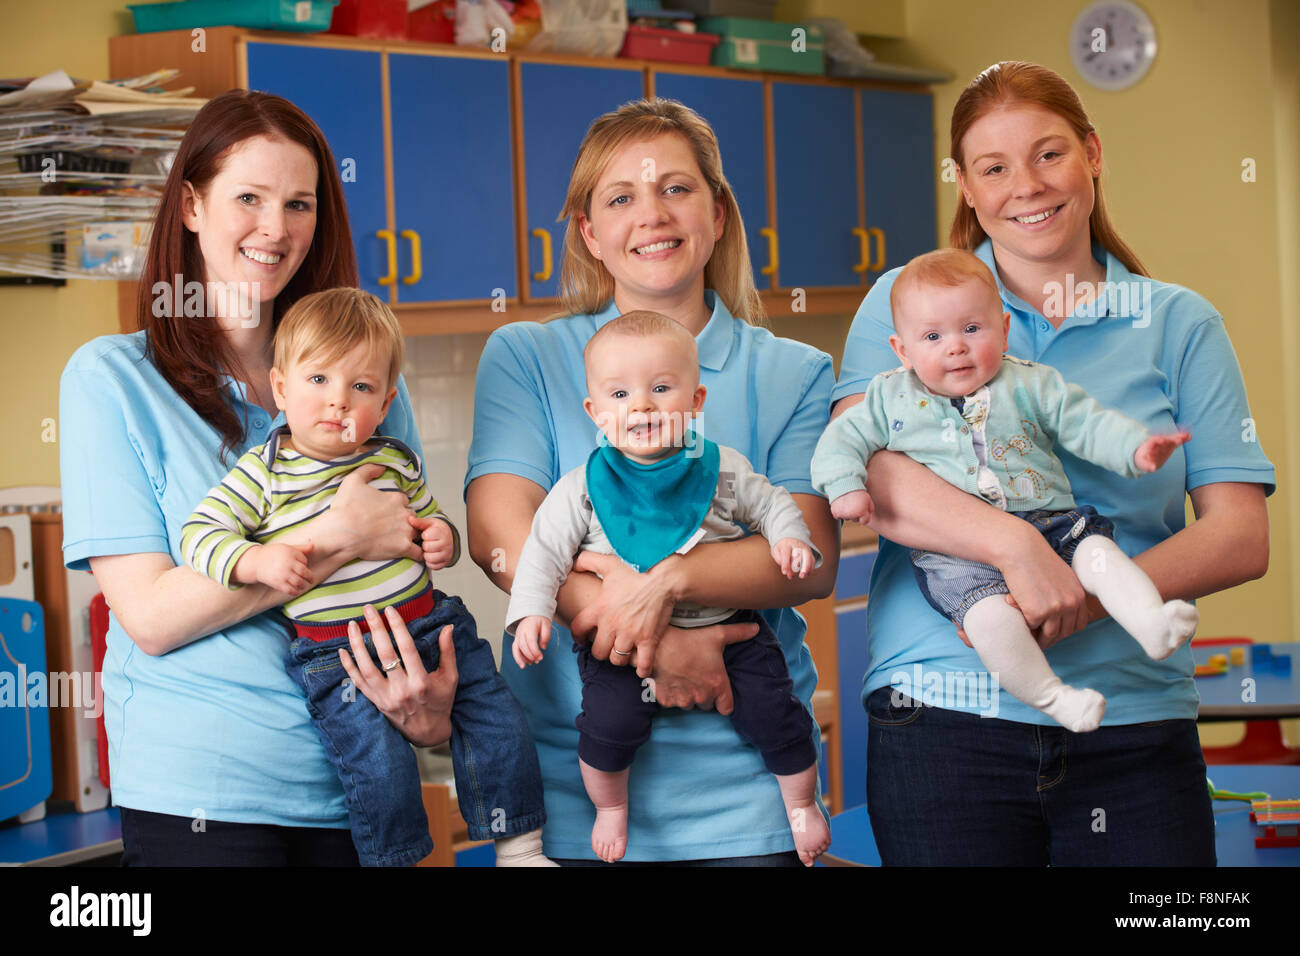 Group Of Workers With Babies In Nursery Stock Photo